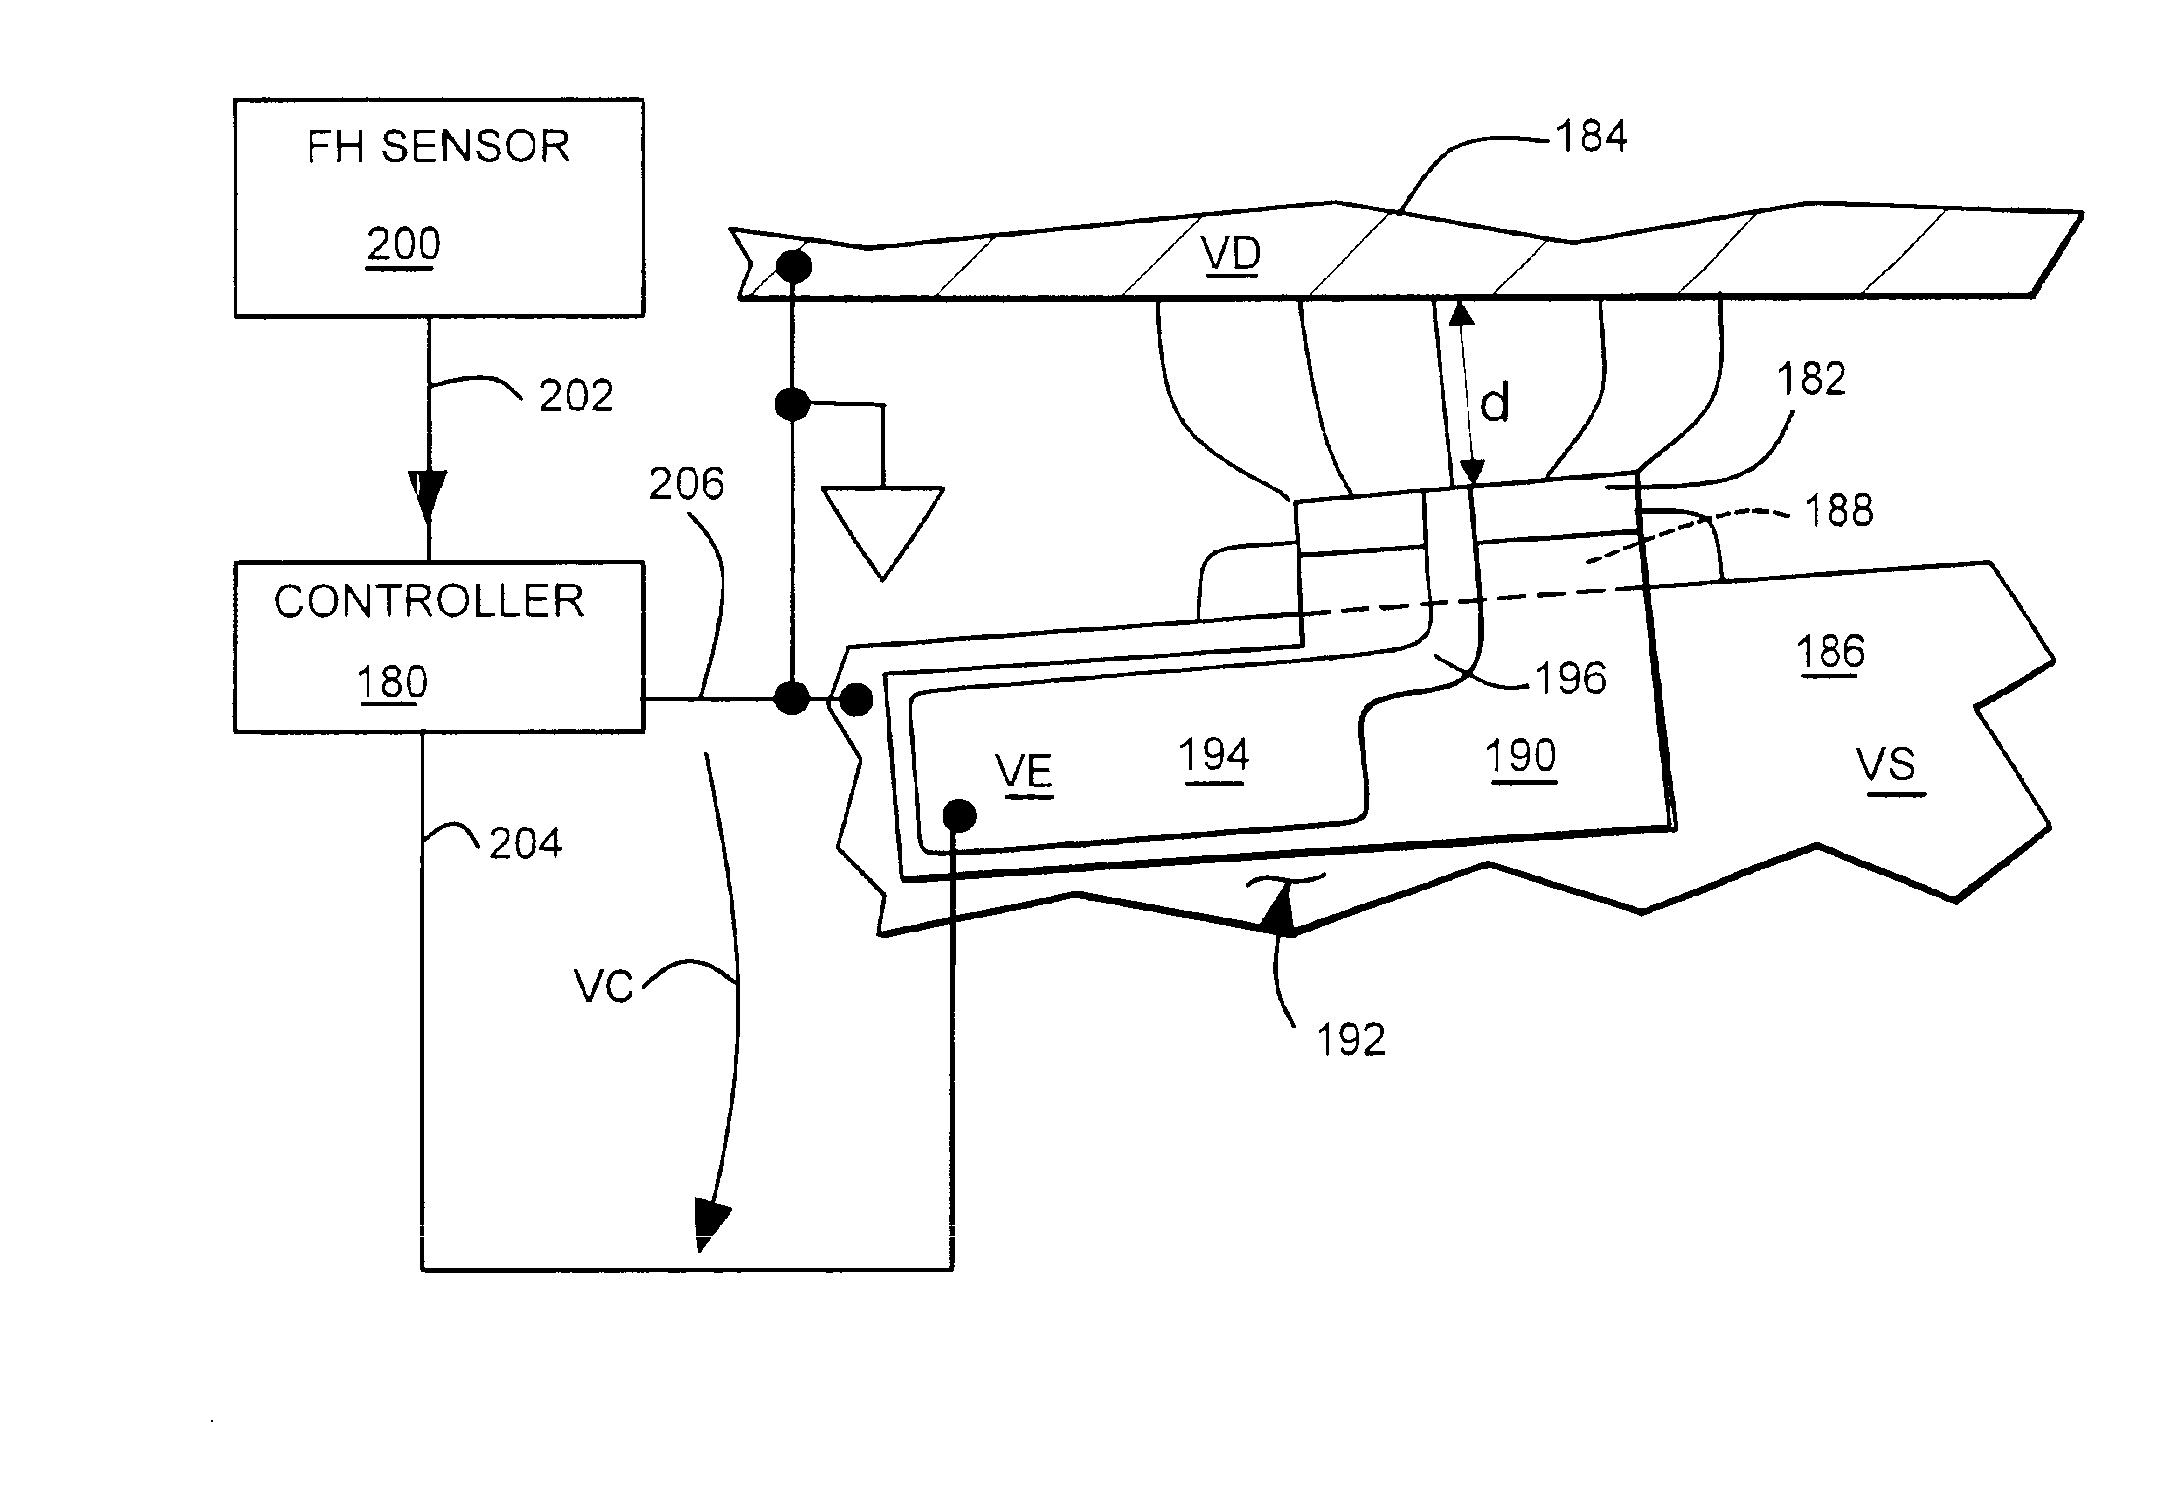 Disc drive slider with protruding electrostatic actuator electrode